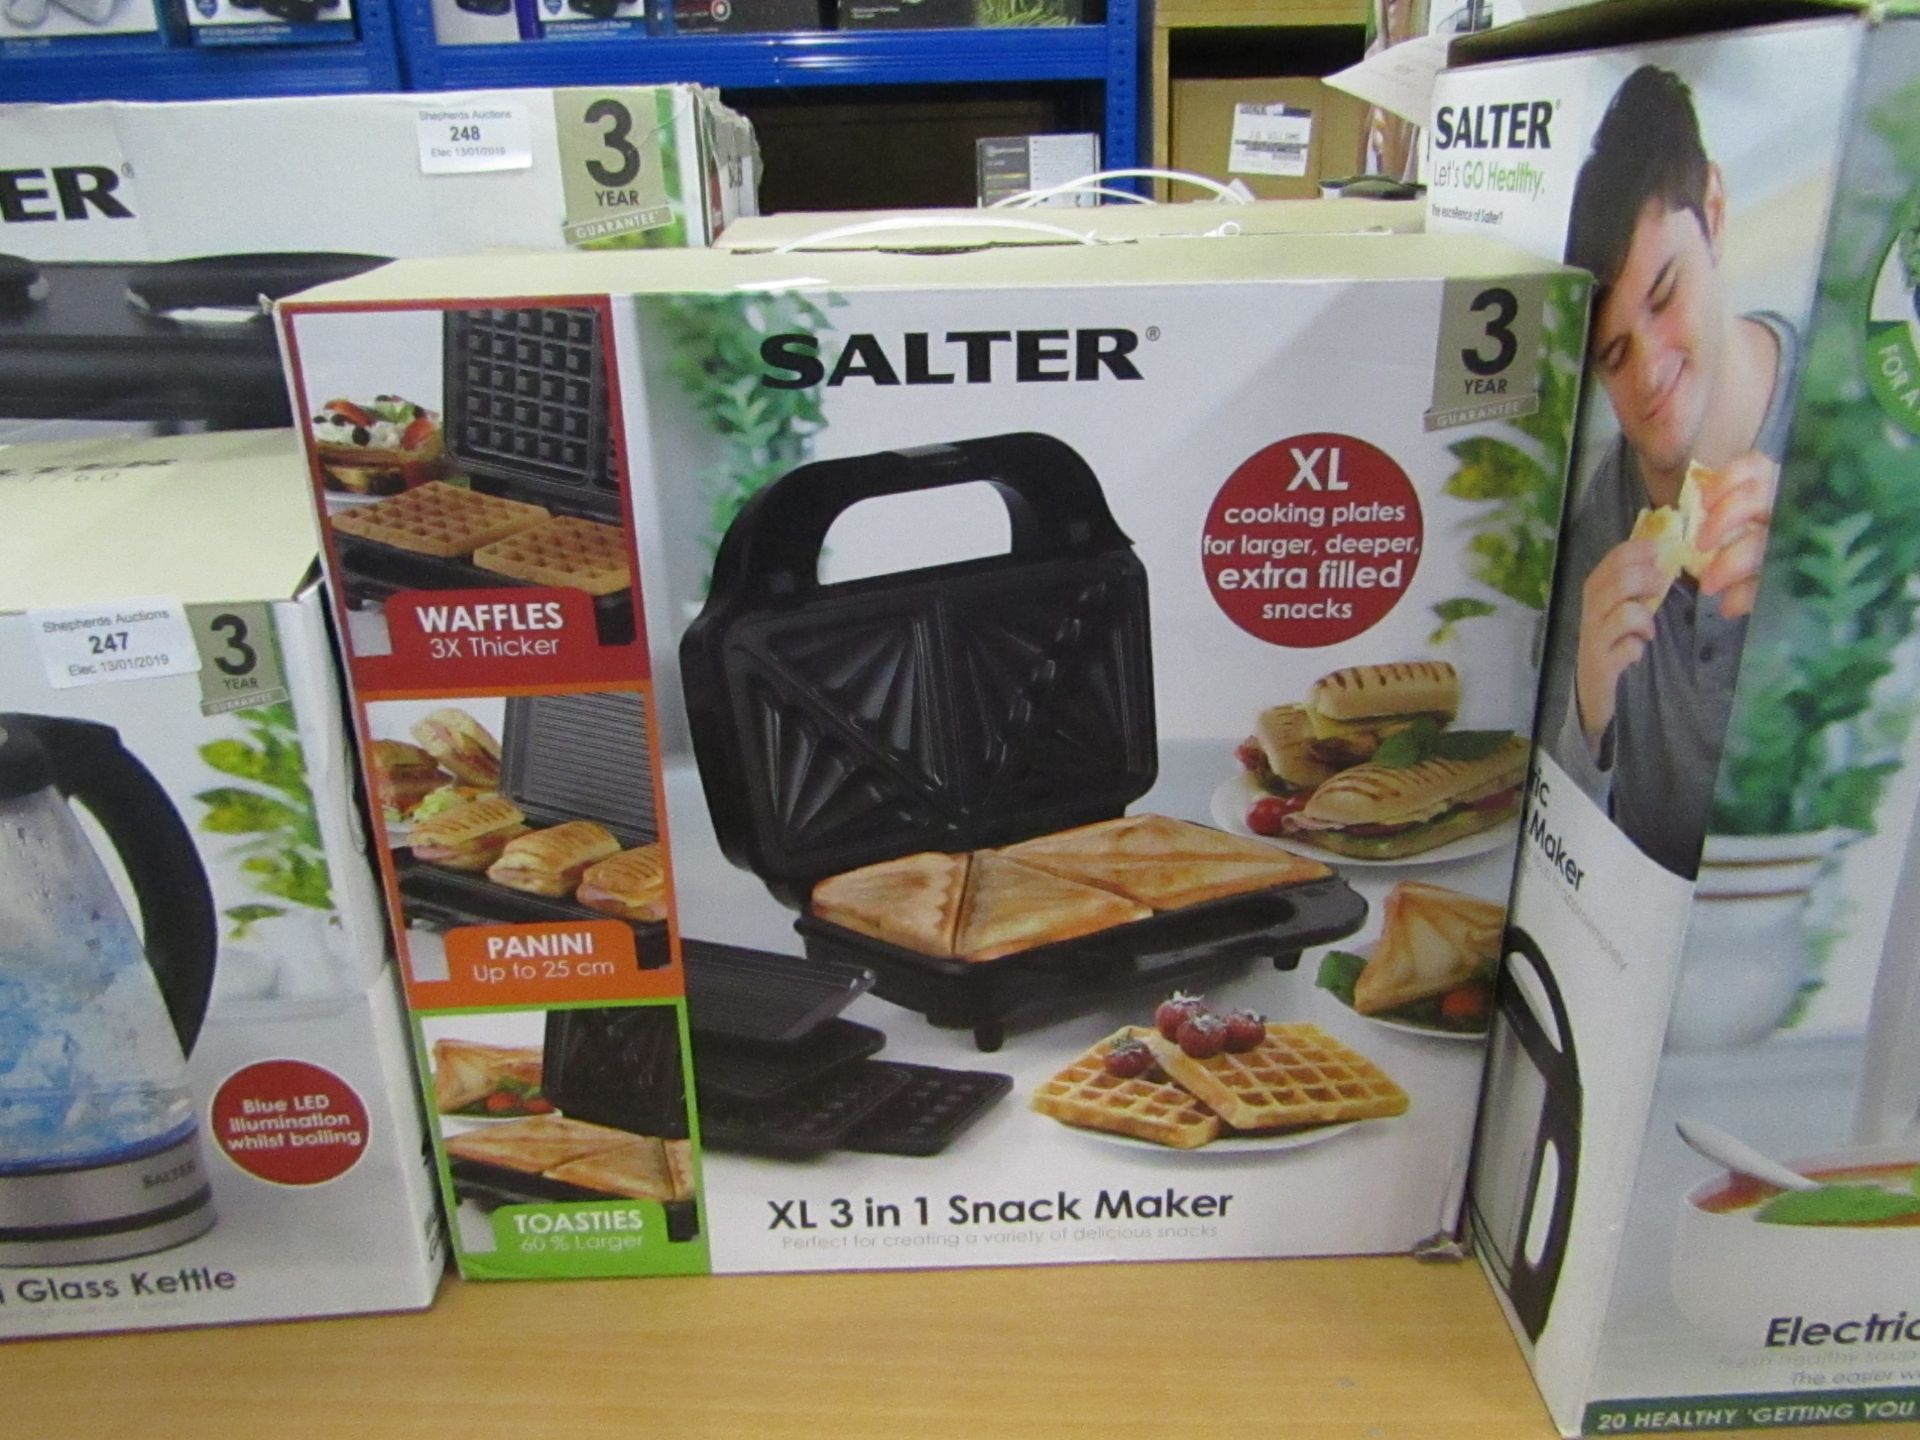 Salter XL 3 in 1 snack maker tested working and boxed.